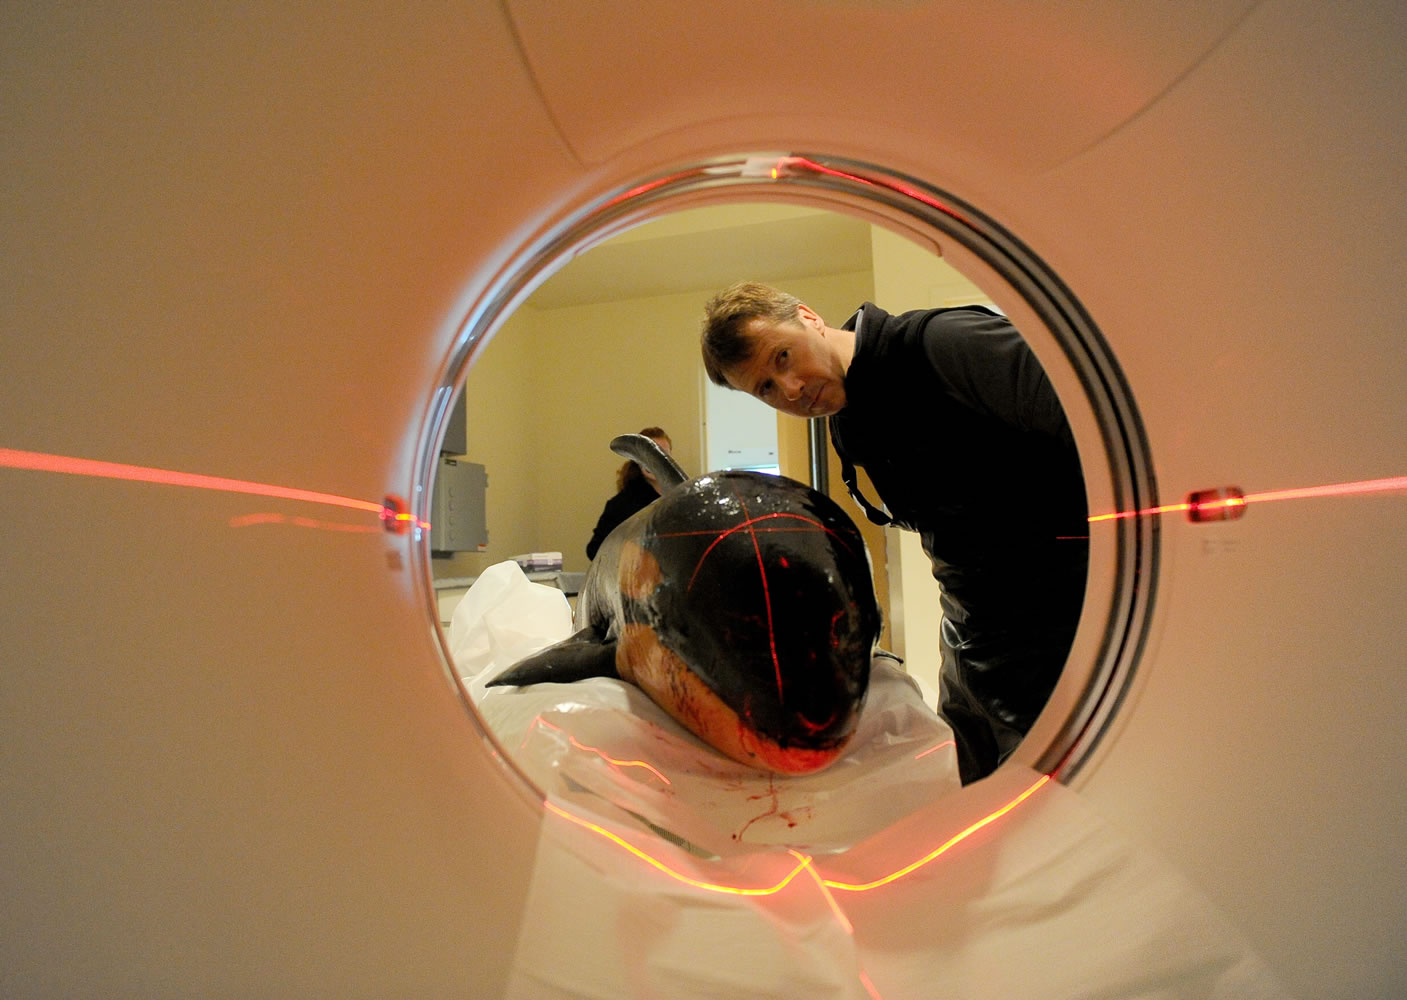 Bob Hallinen/The Anchorage Daily News
Marine mammal researcher Russ Andrews checks the position of a 300-pound baby killer whale in a CT scanner Friday at the Alaska Spine Institute in Anchorage, Alaska.